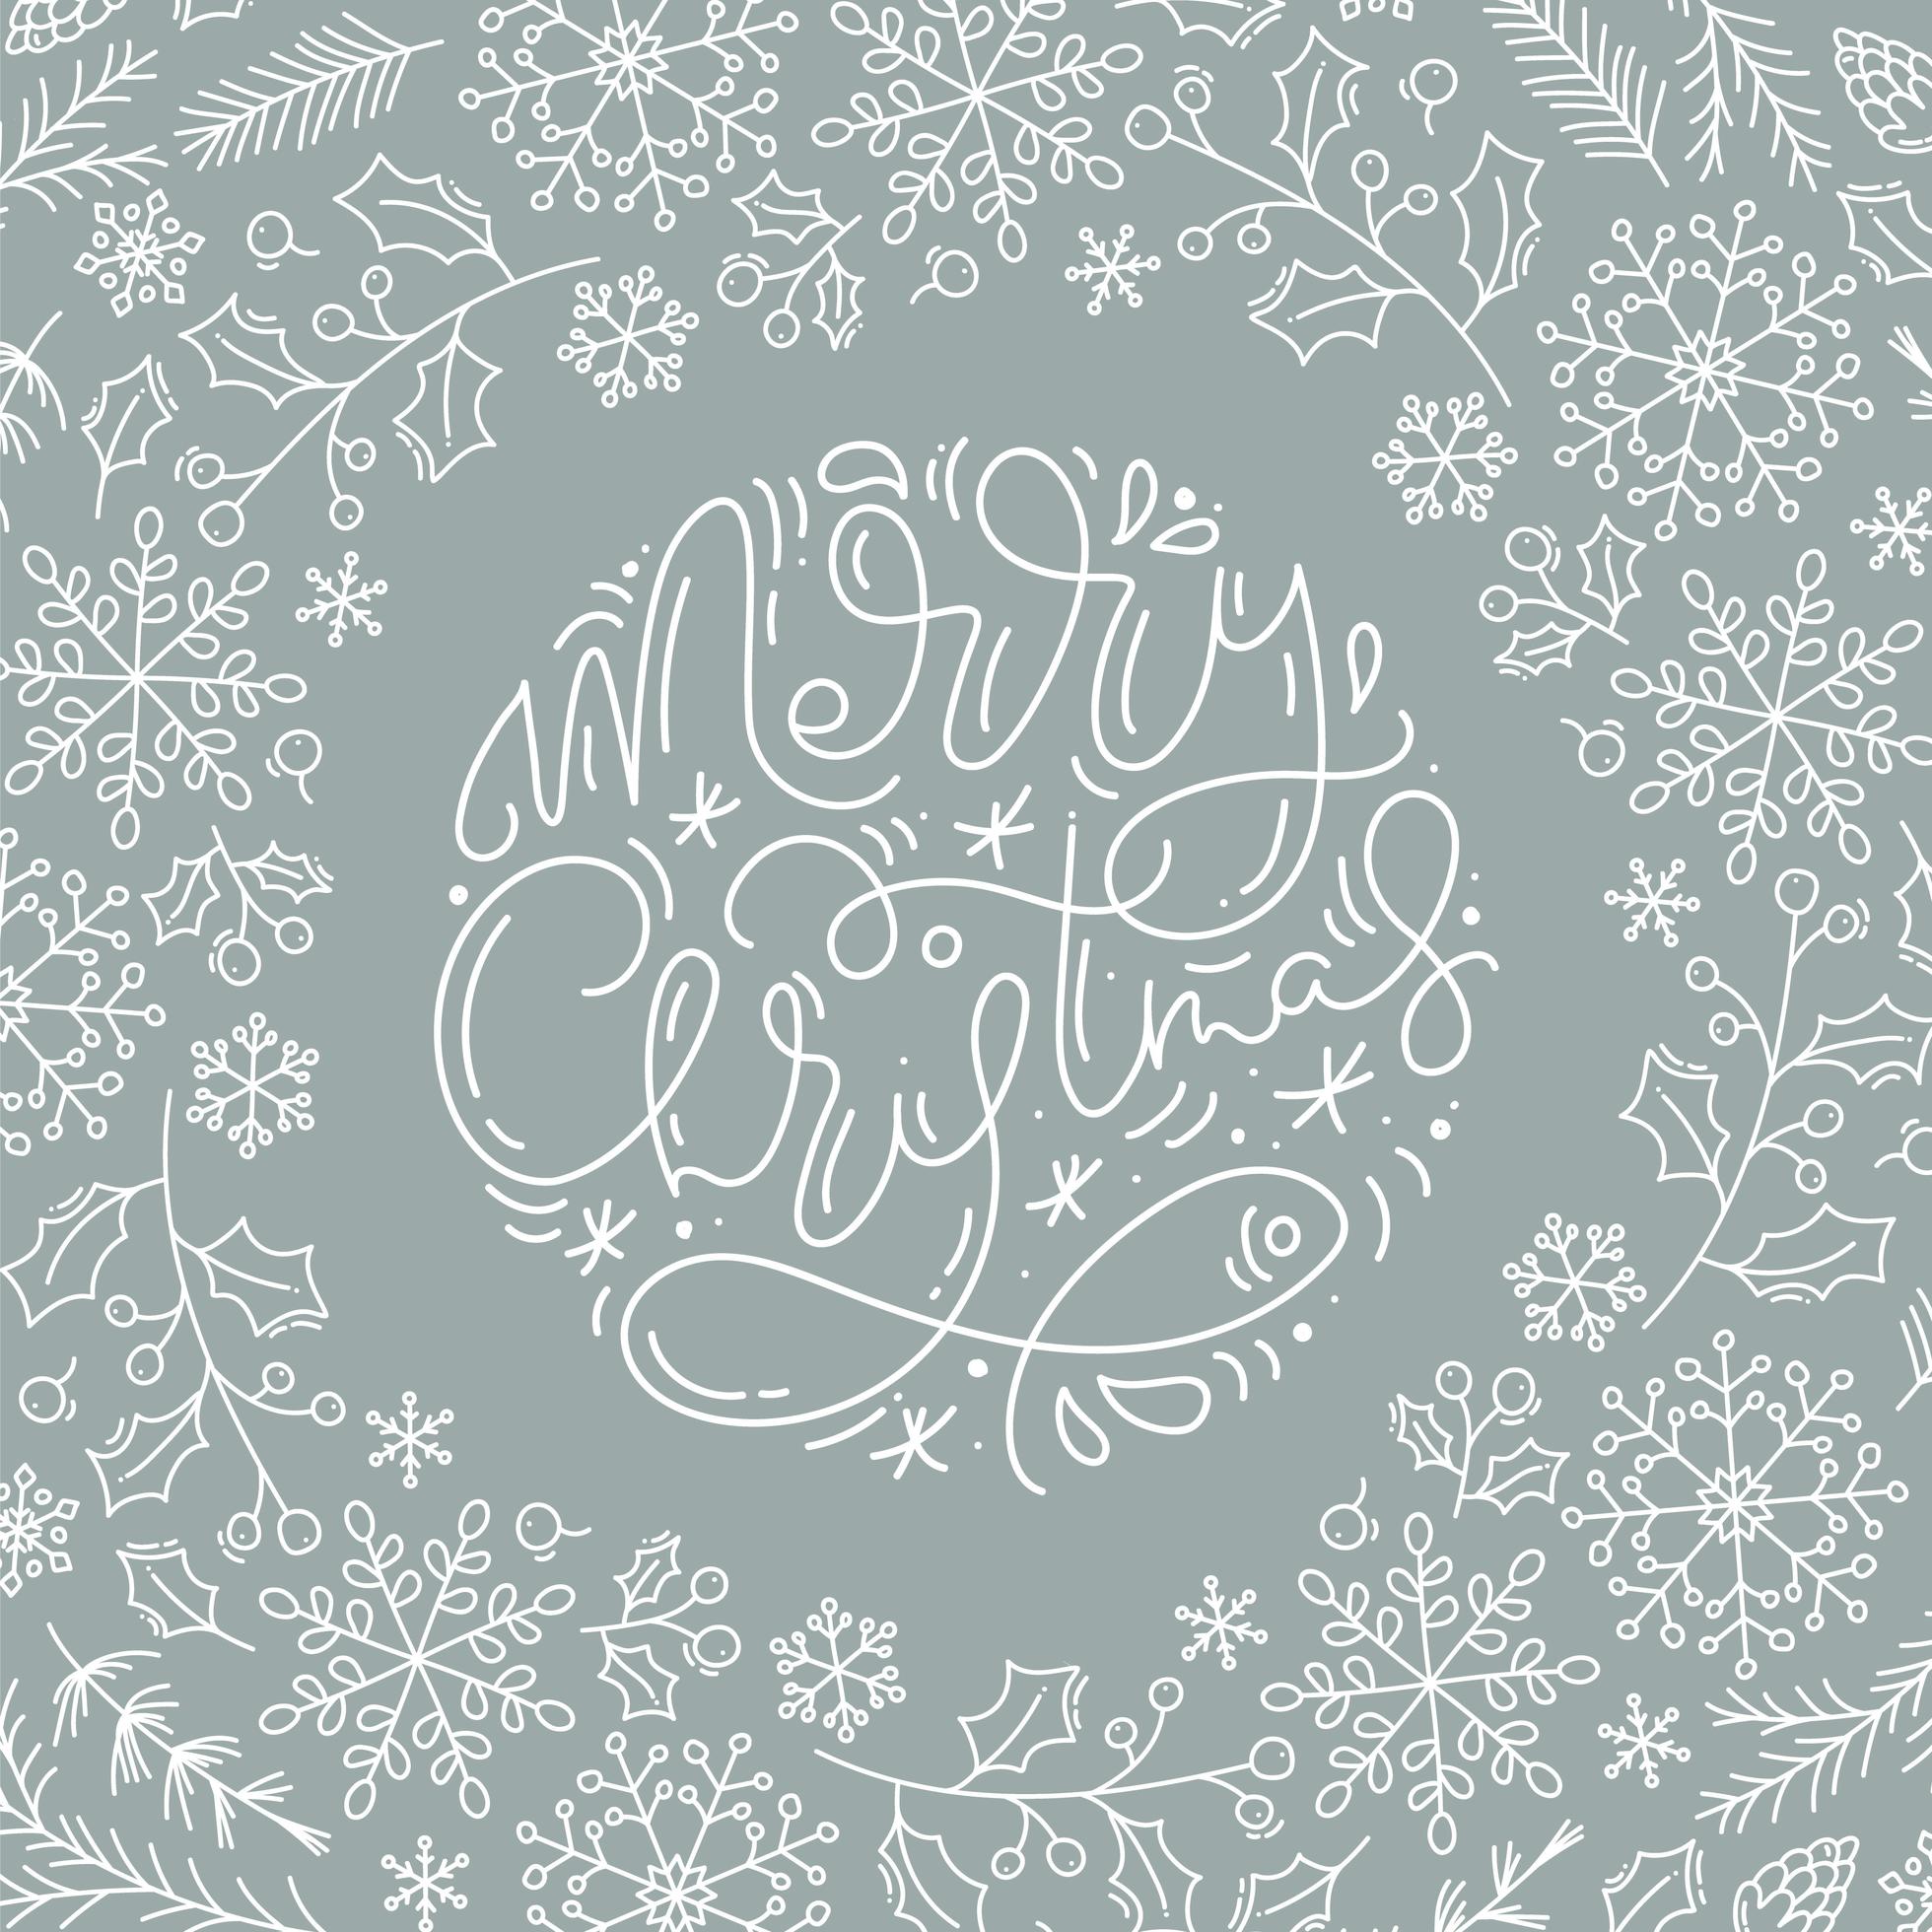 Merry Christmas calligraphy and line style winter elements vector